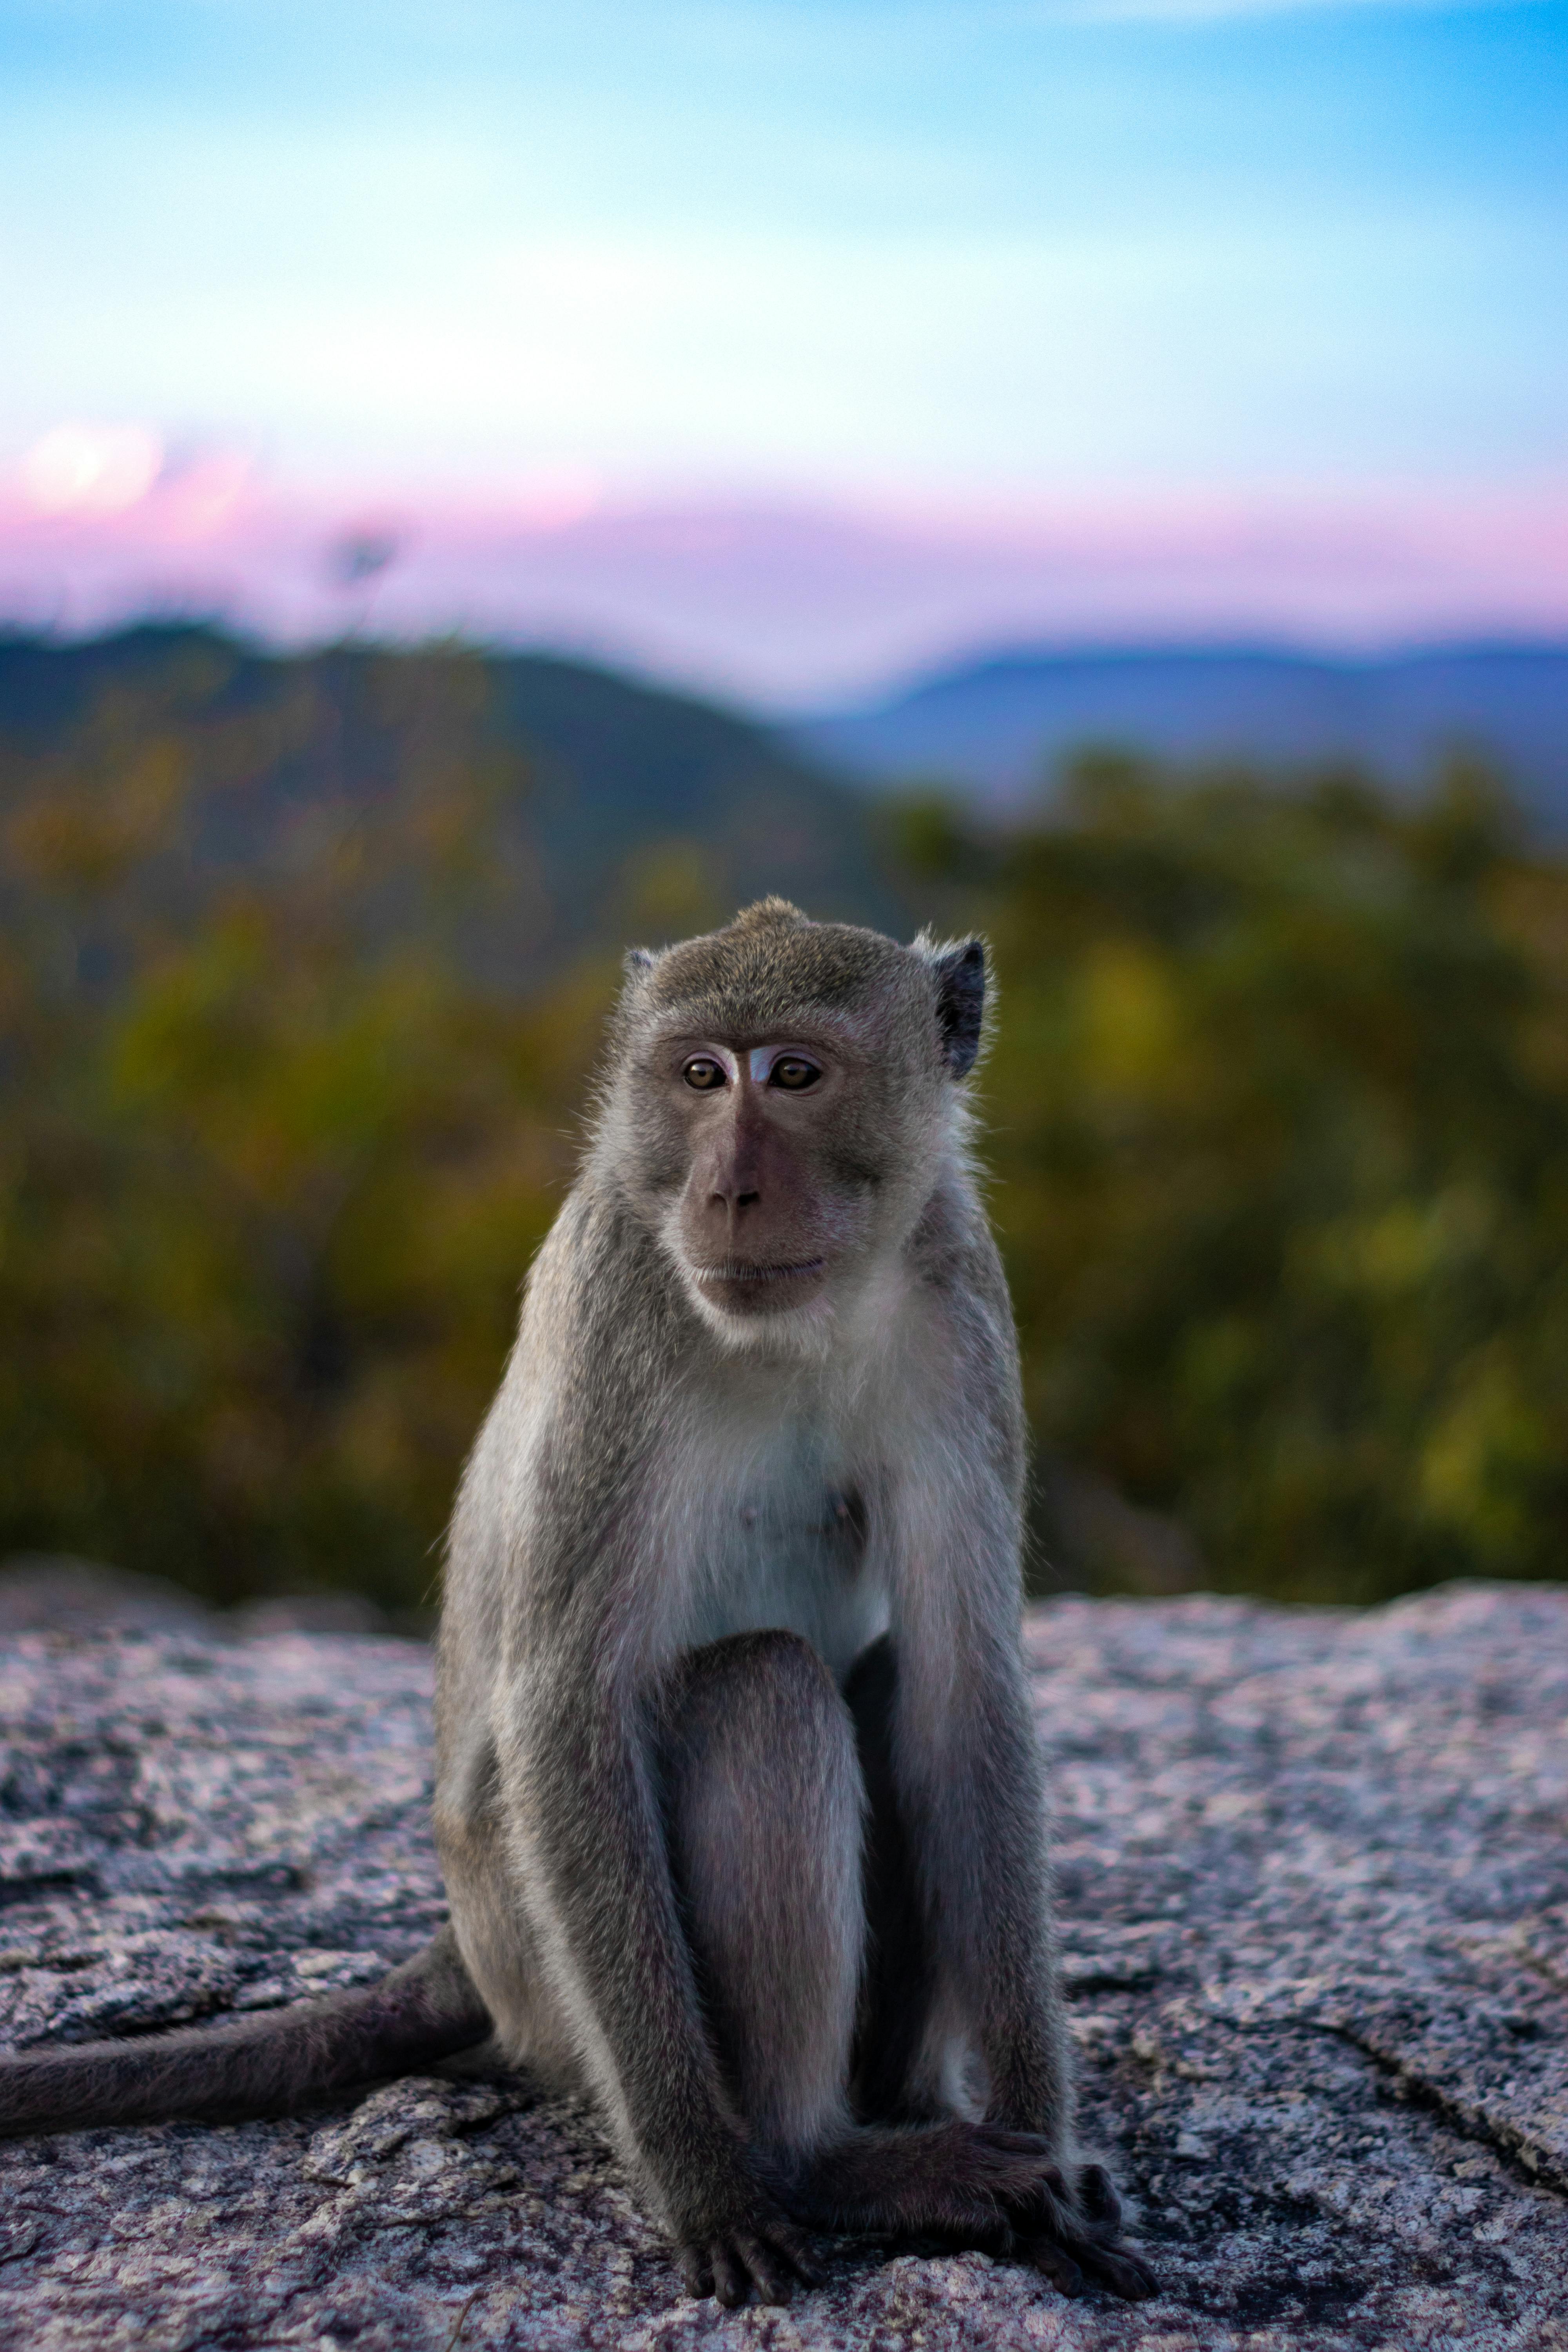 Download Monkey wallpapers for mobile phone free Monkey HD pictures